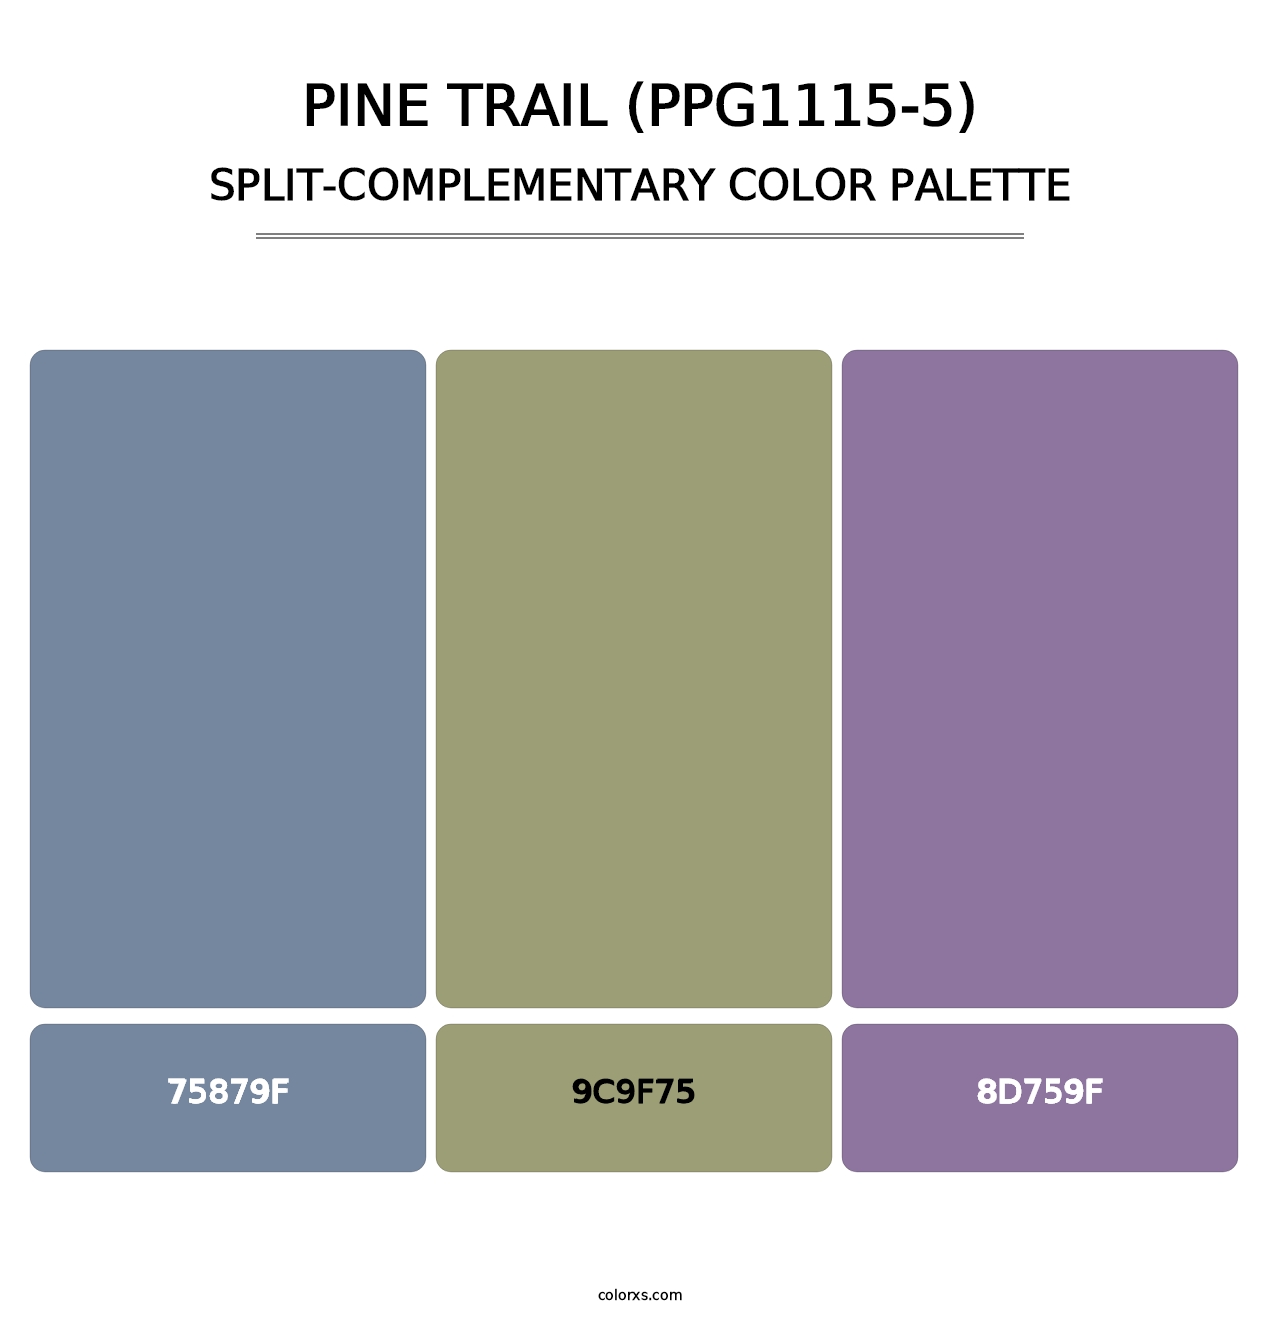 Pine Trail (PPG1115-5) - Split-Complementary Color Palette